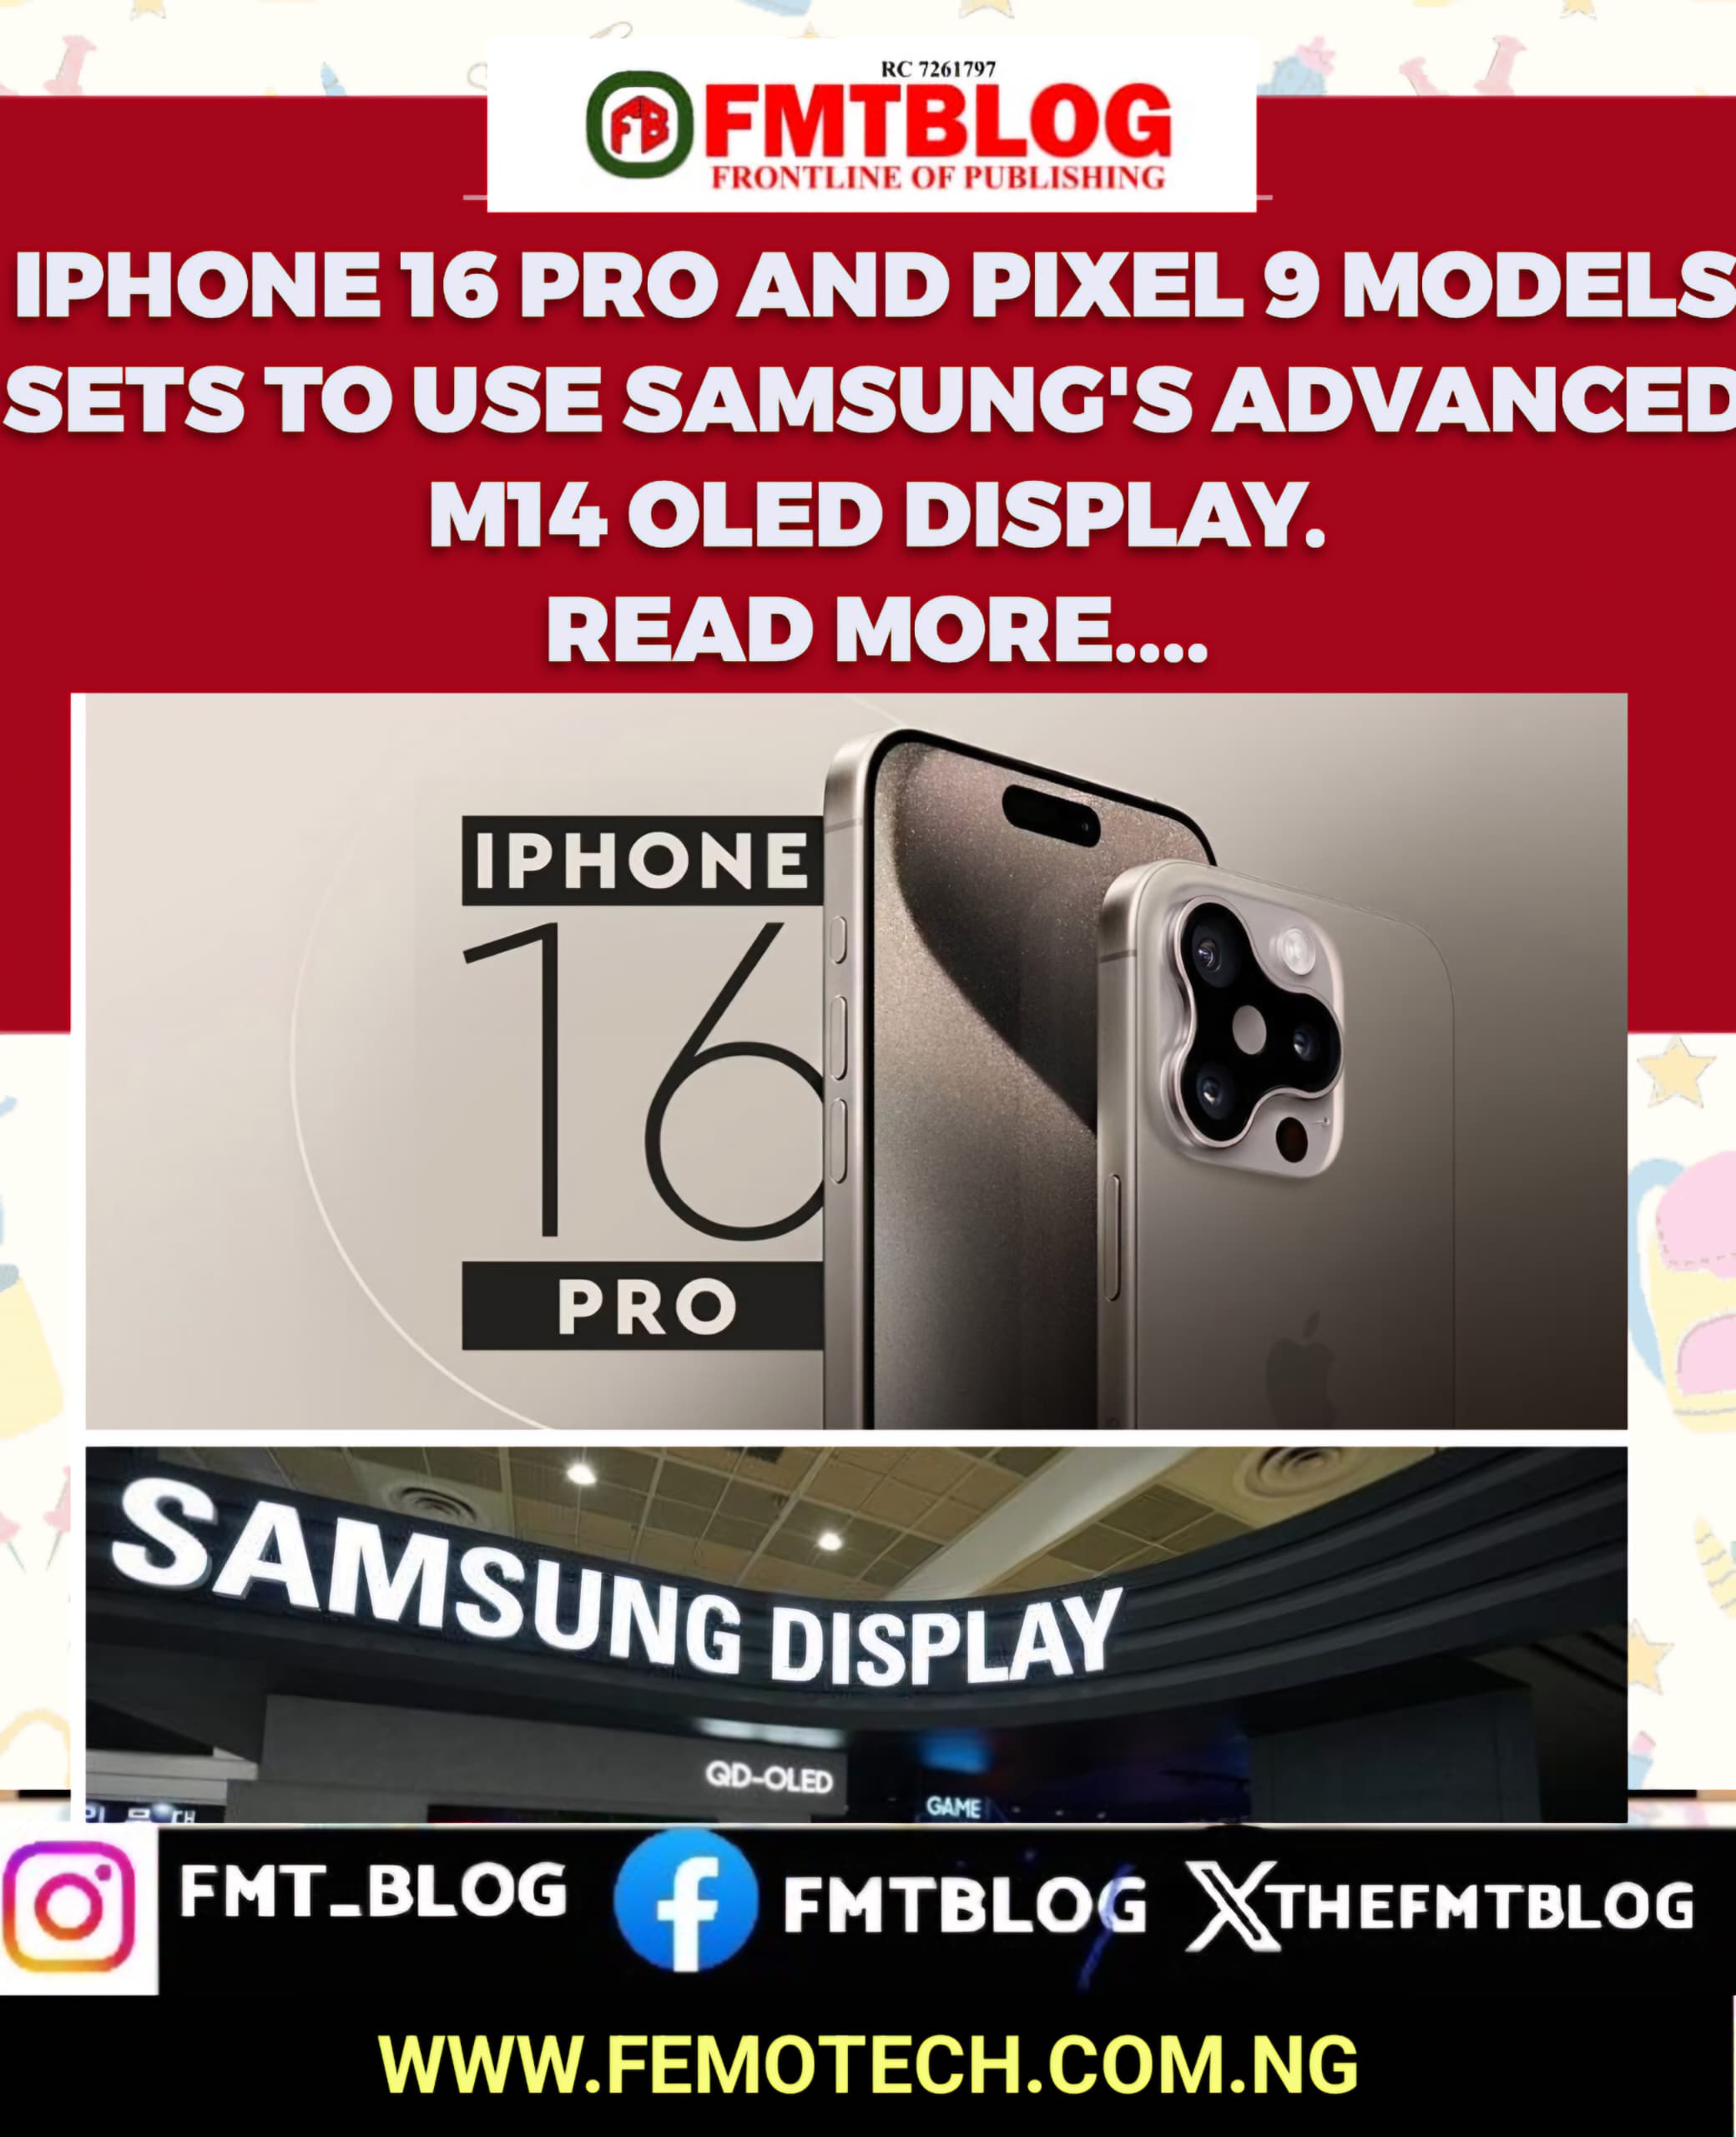 iPhone 16 Pro and Pixel 9 Models Sets To Use Samsung’s Advanced M14 OLED Display